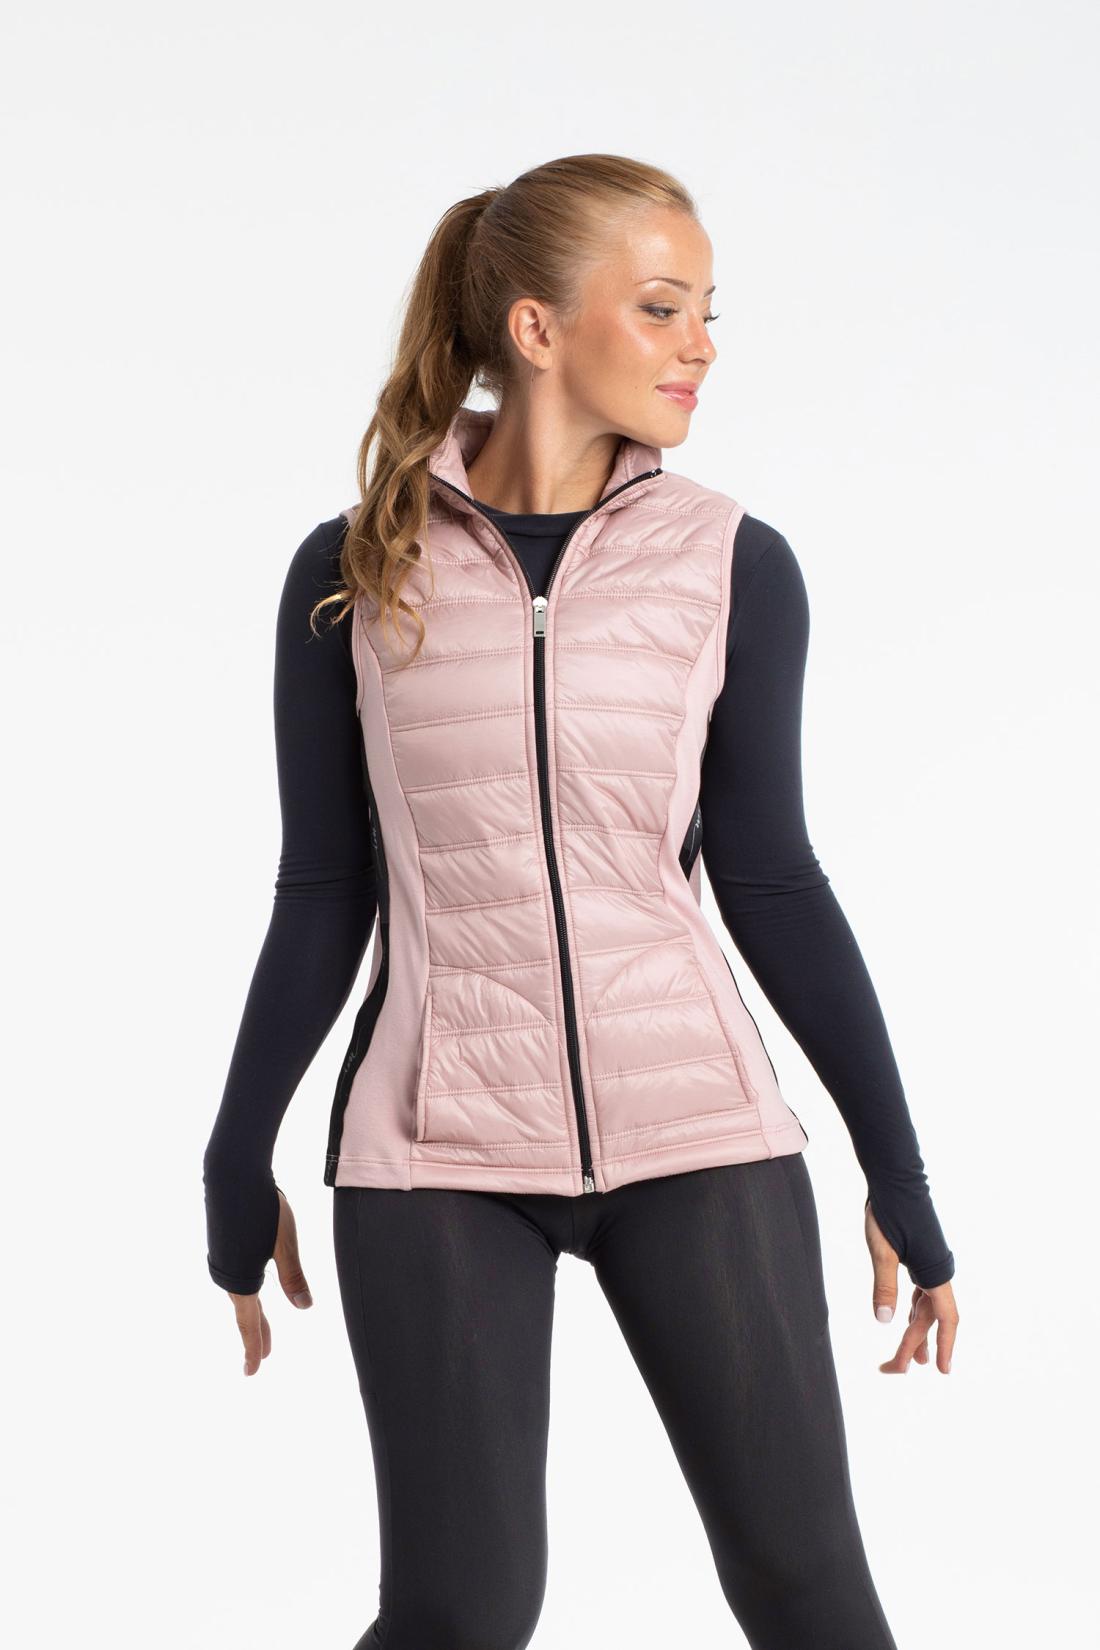 Apolo padded vest combined with plush fabric Intermezzo ballet dance skating